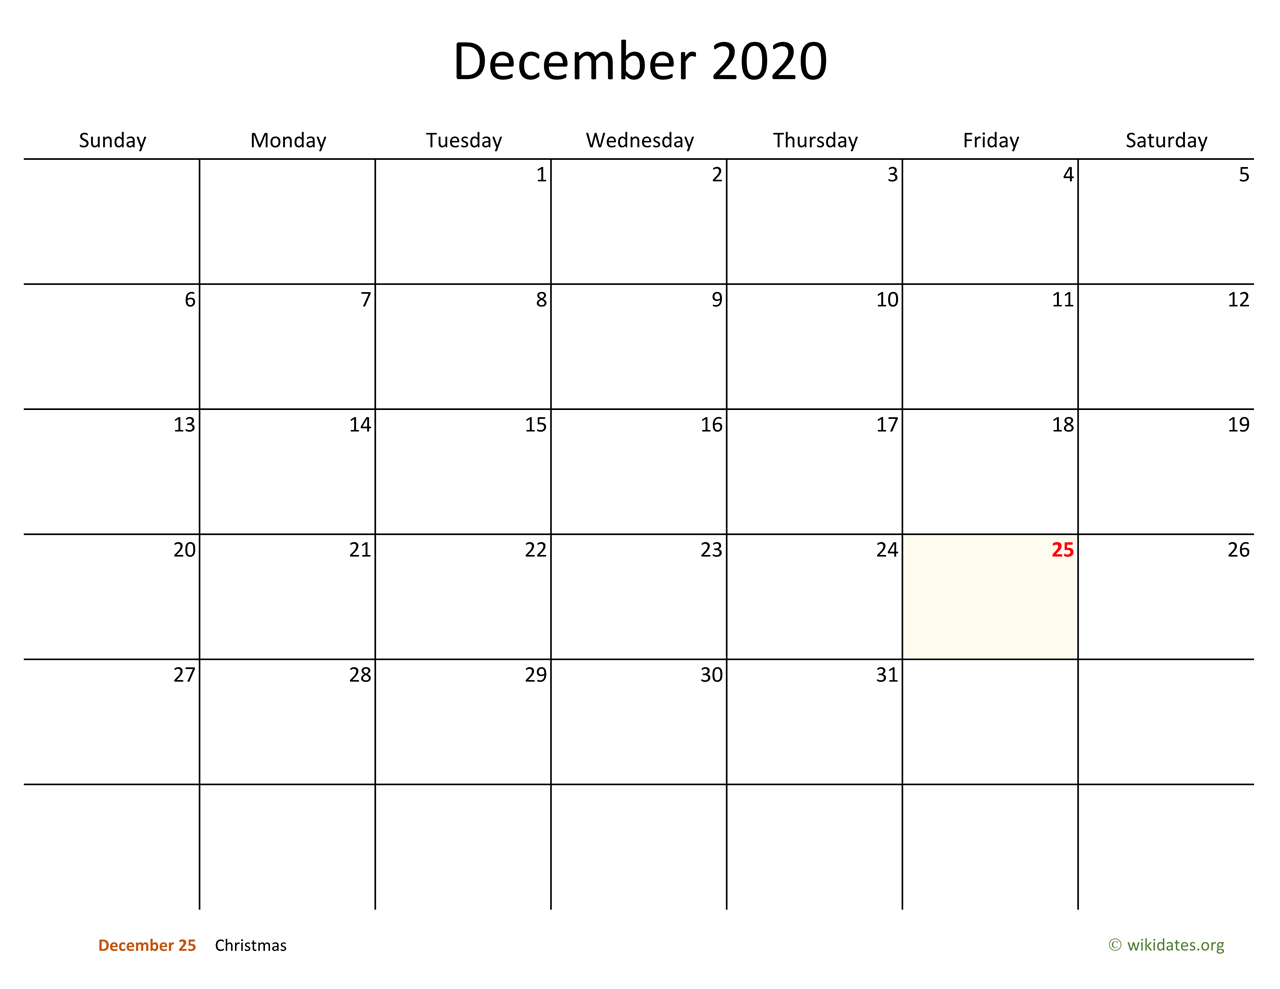 December 2020 Calendar with Bigger boxes | WikiDates.org